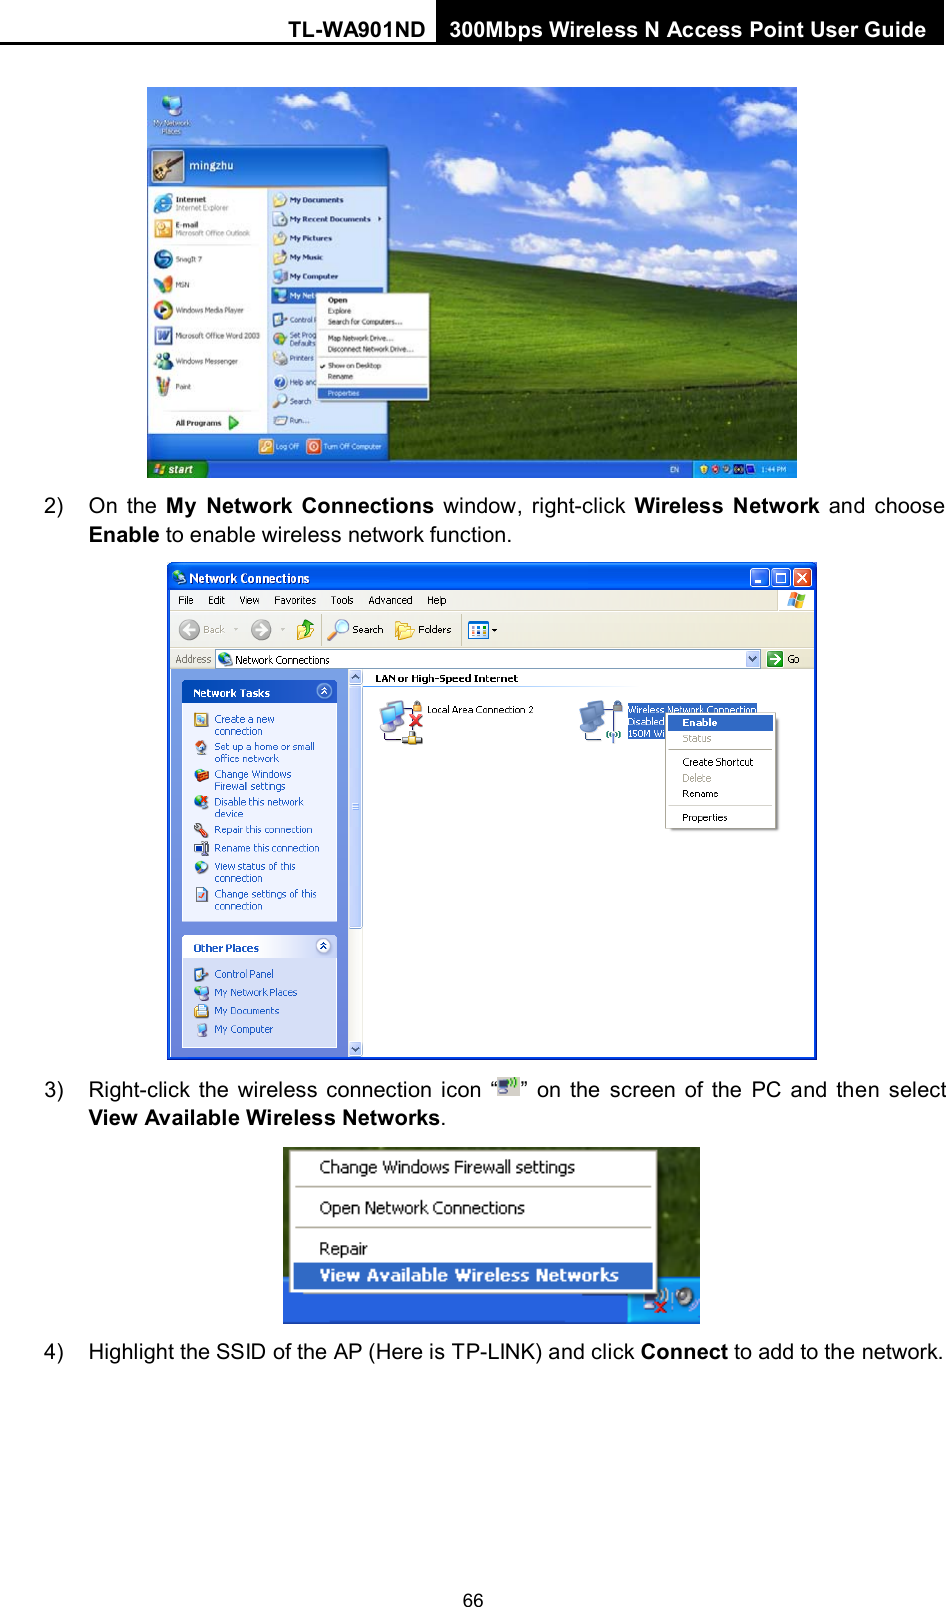 TL-WA901ND 300Mbps Wireless N Access Point User Guide  66  2) On the My Network Connections window, right-click  Wireless Network and choose Enable to enable wireless network function.  3) Right-click the wireless connection icon “ ”  on the screen of the PC and then select View Available Wireless Networks.  4) Highlight the SSID of the AP (Here is TP-LINK) and click Connect to add to the network. 